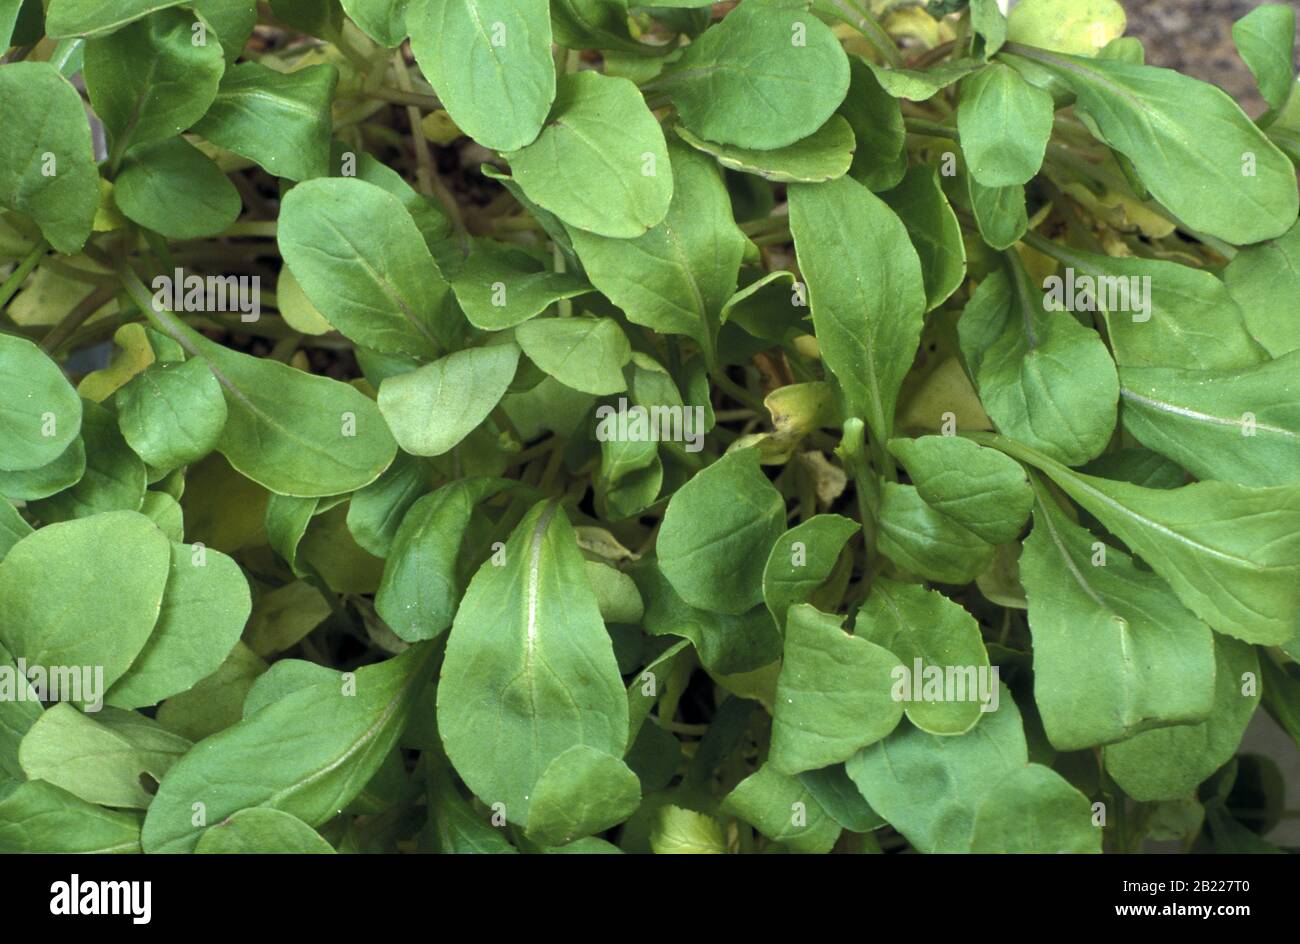 BABY LEAVES OF ROCKET OR ARUGULA (ERUCA SATIVA) IS AN EDIBLE PLANT USED AS A LEAF VEGETABLE. Stock Photo